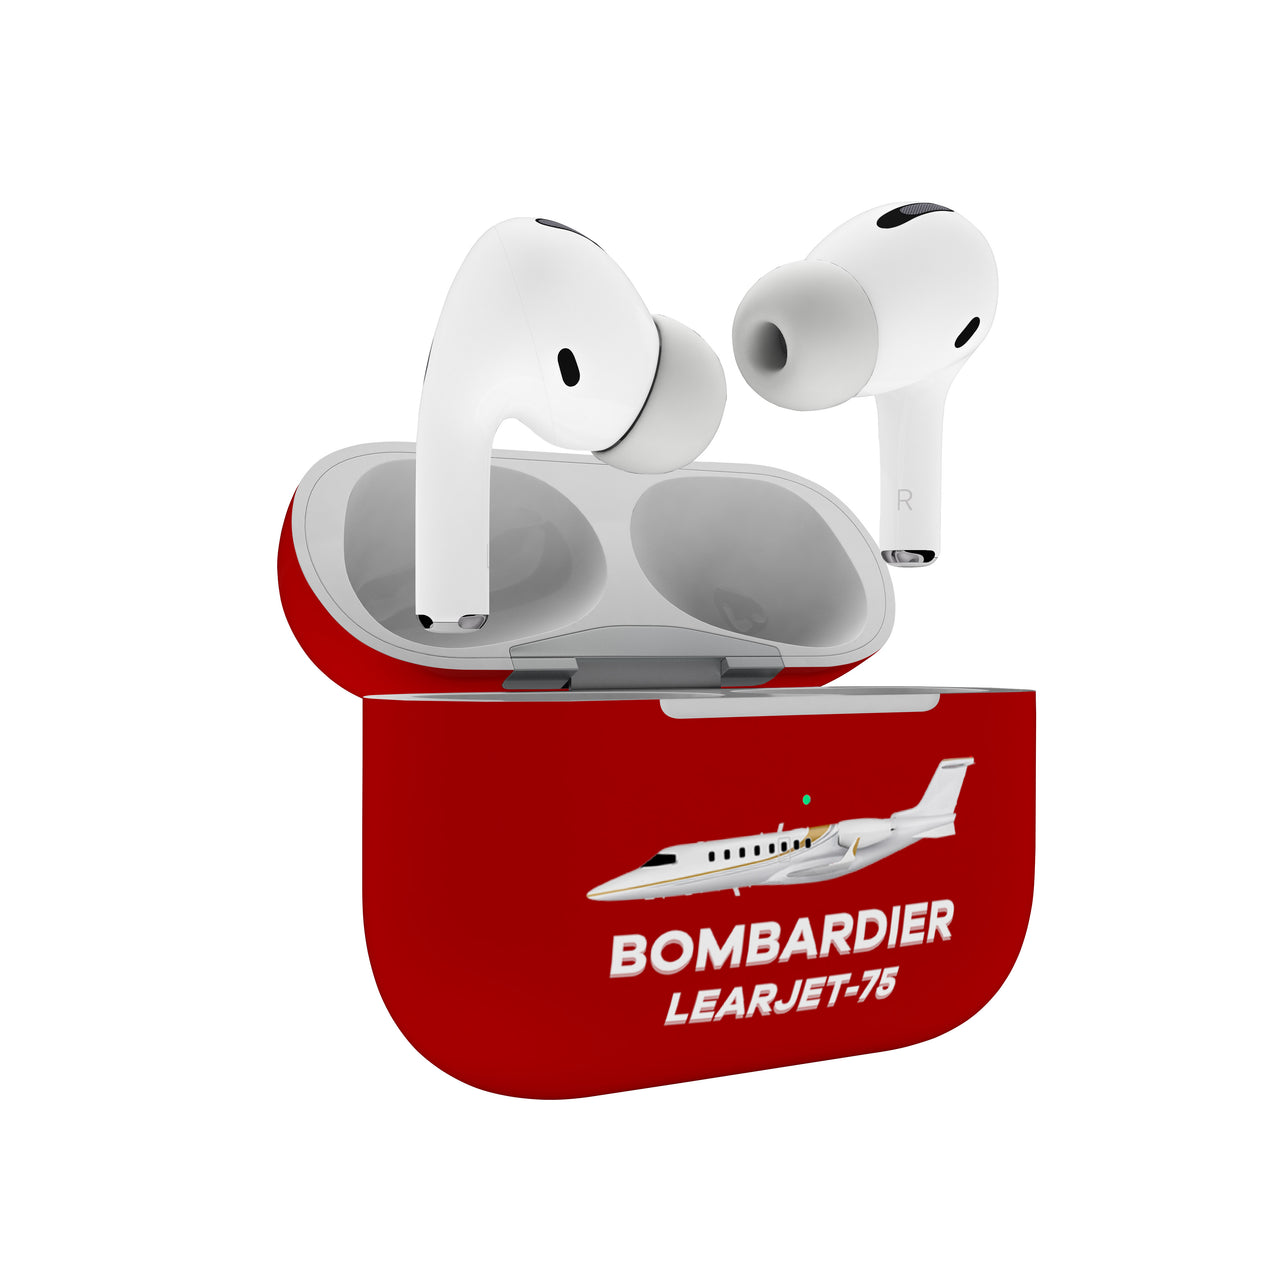 The Bombardier Learjet 75 Designed AirPods "Pro" Cases